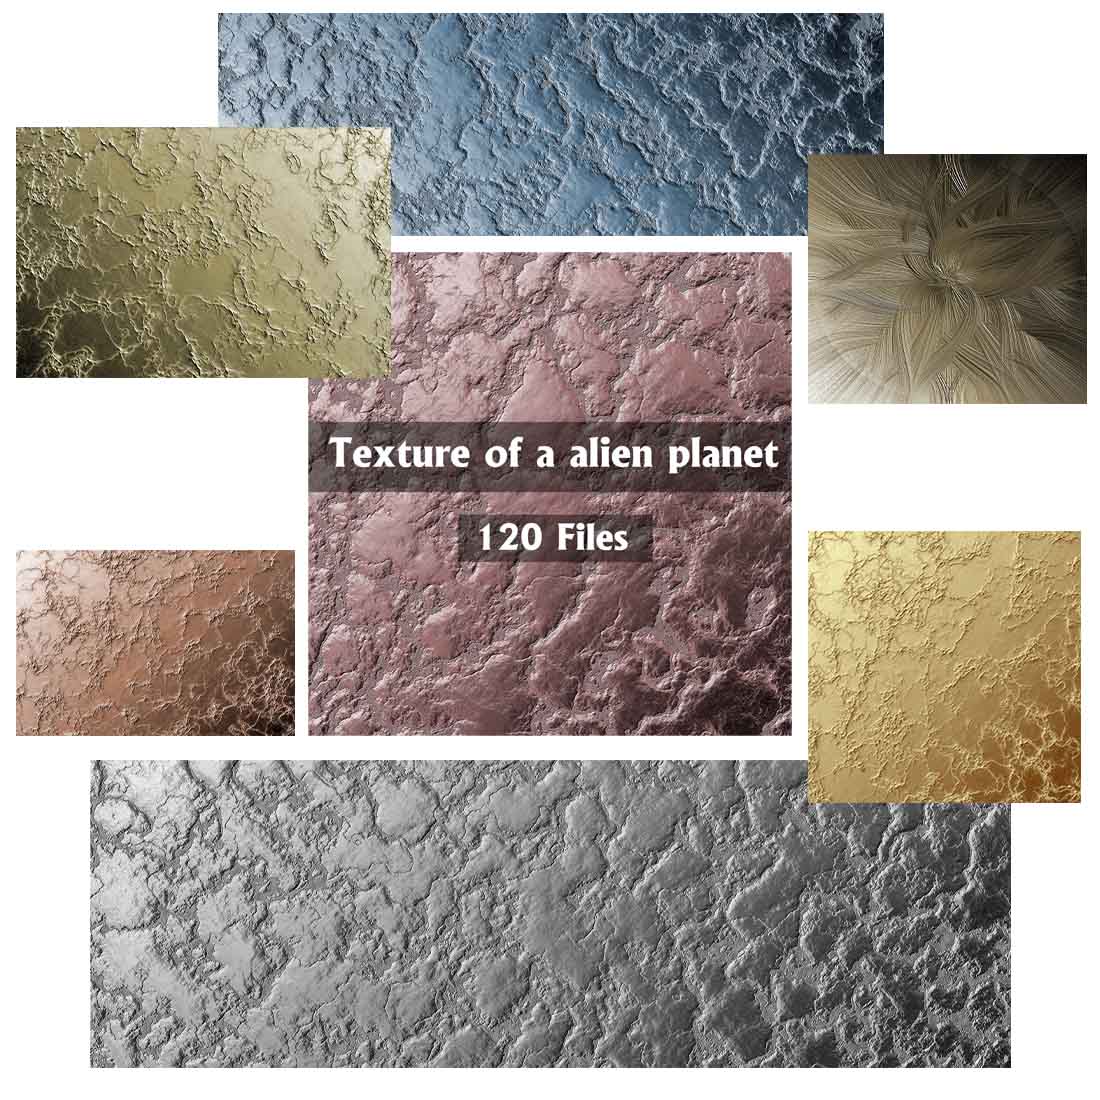 Texture of a alien planet preview image.